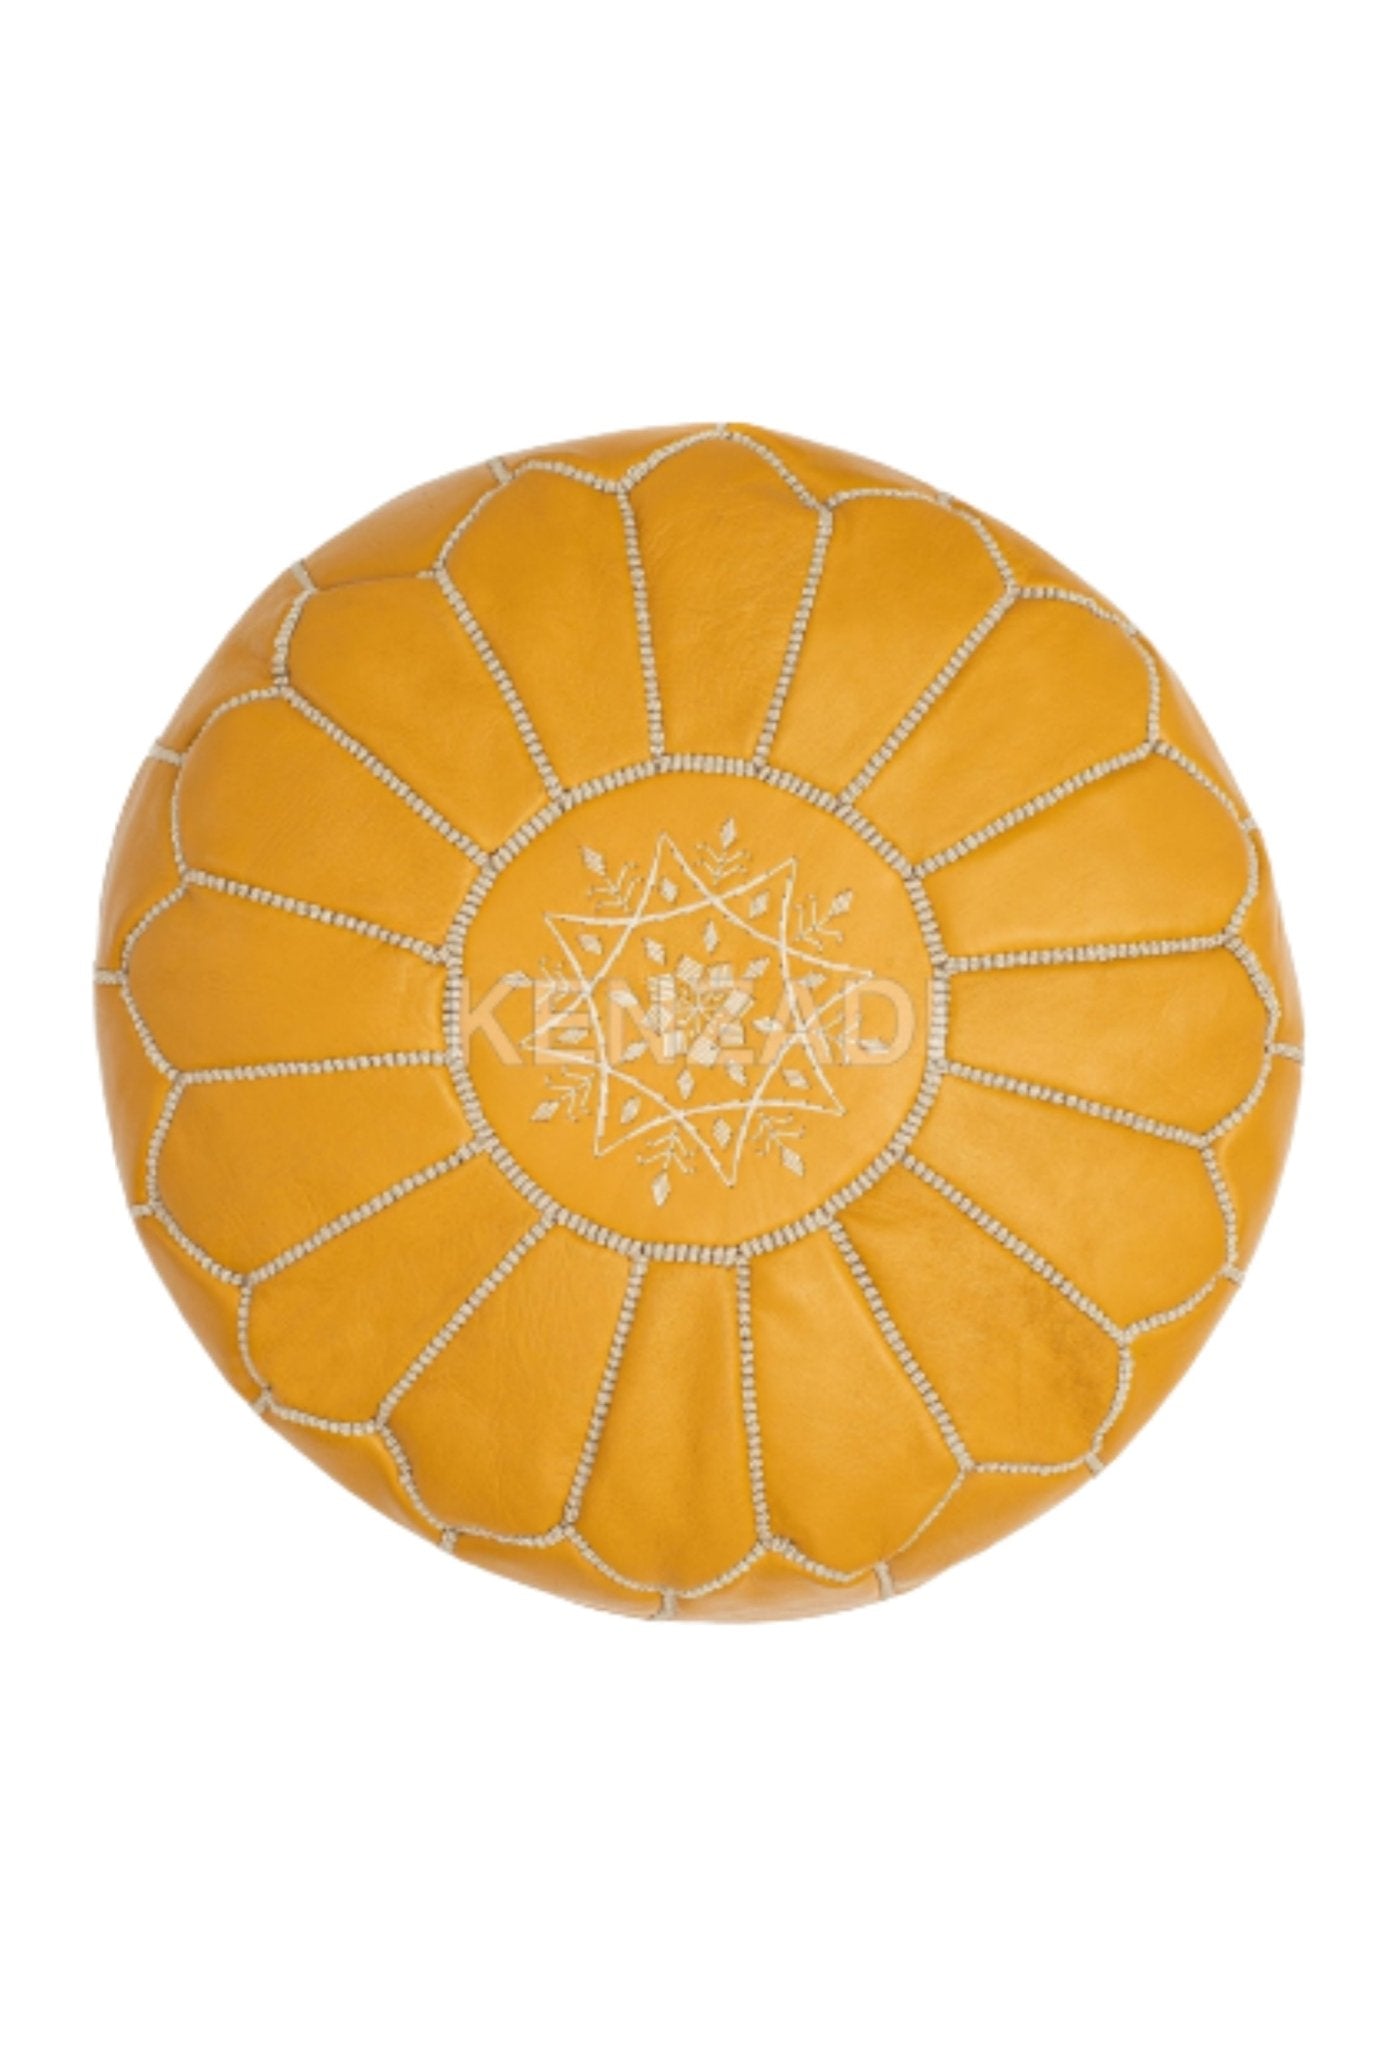 Moroccan leather pouf, round pouf, berber pouf, Yellow pouf with White embroidery by Kenzadi - Handmade by My Poufs